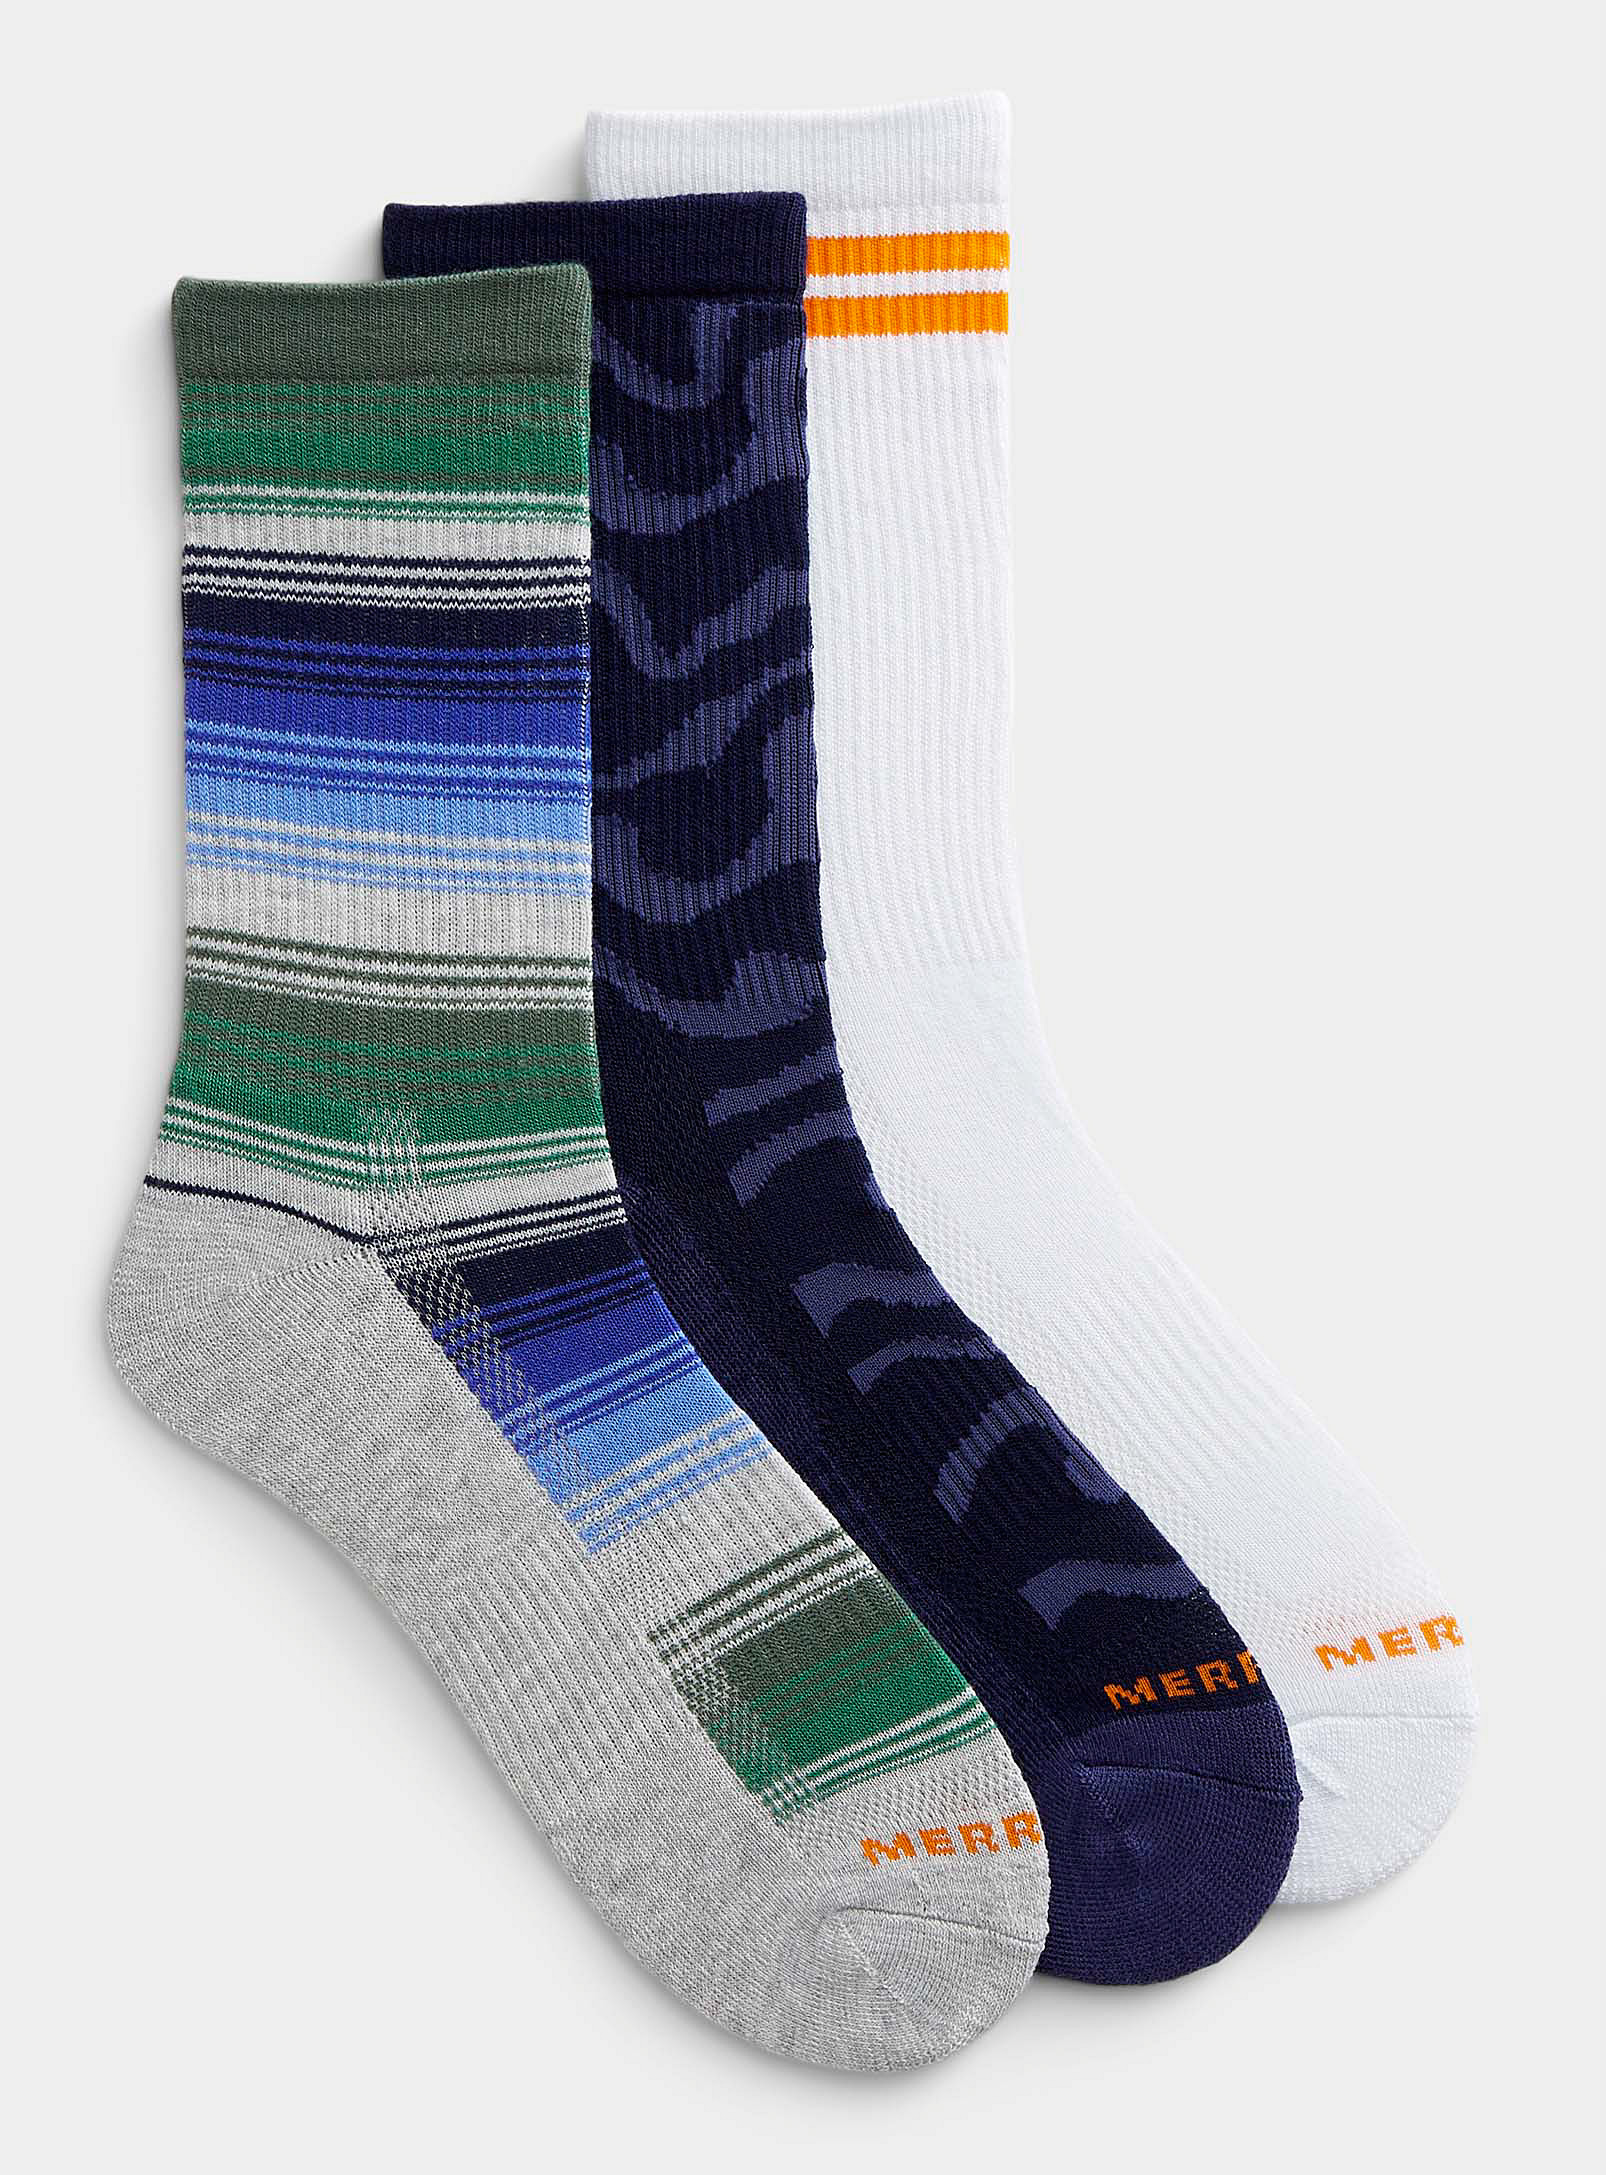 Merrell - Les chaussettes renforcées rayures mixtes Collection Everyday - Emballage de 3